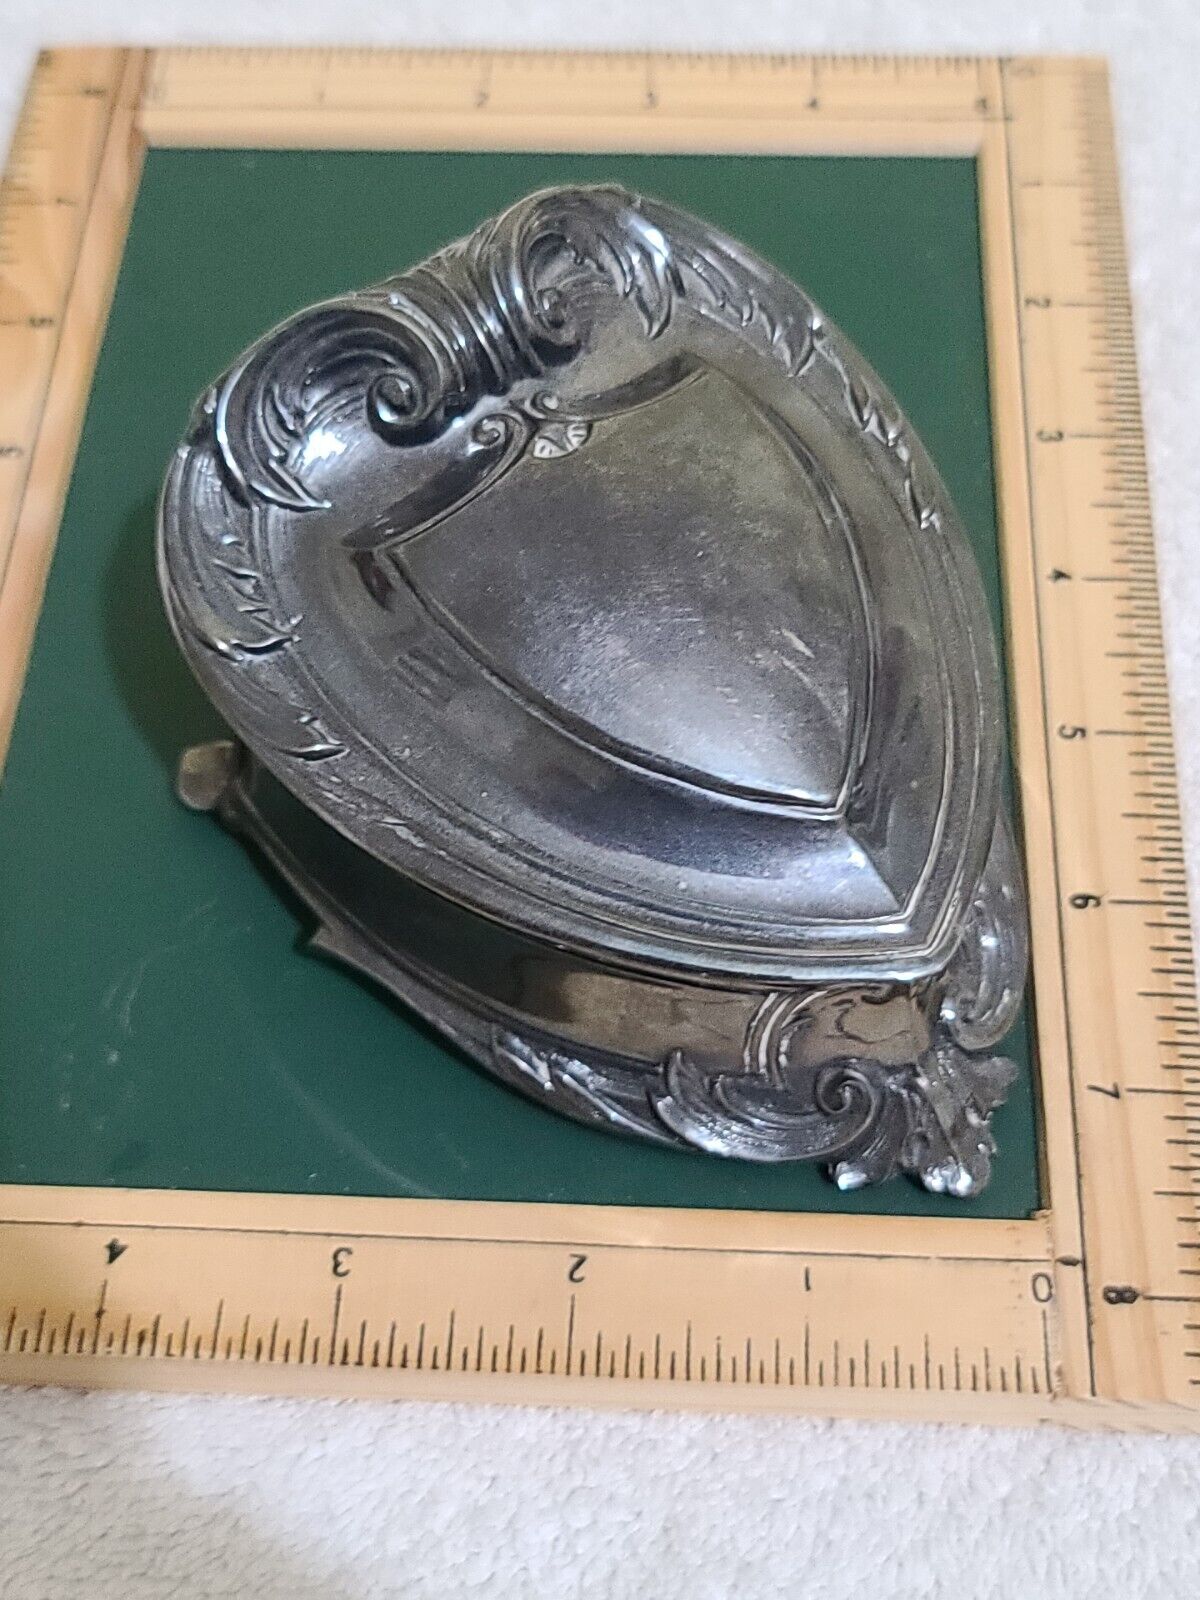 Antique WB Mfg Co Weidlich Brothers Art Floral Pewter Jewelry Casket Trinket Box